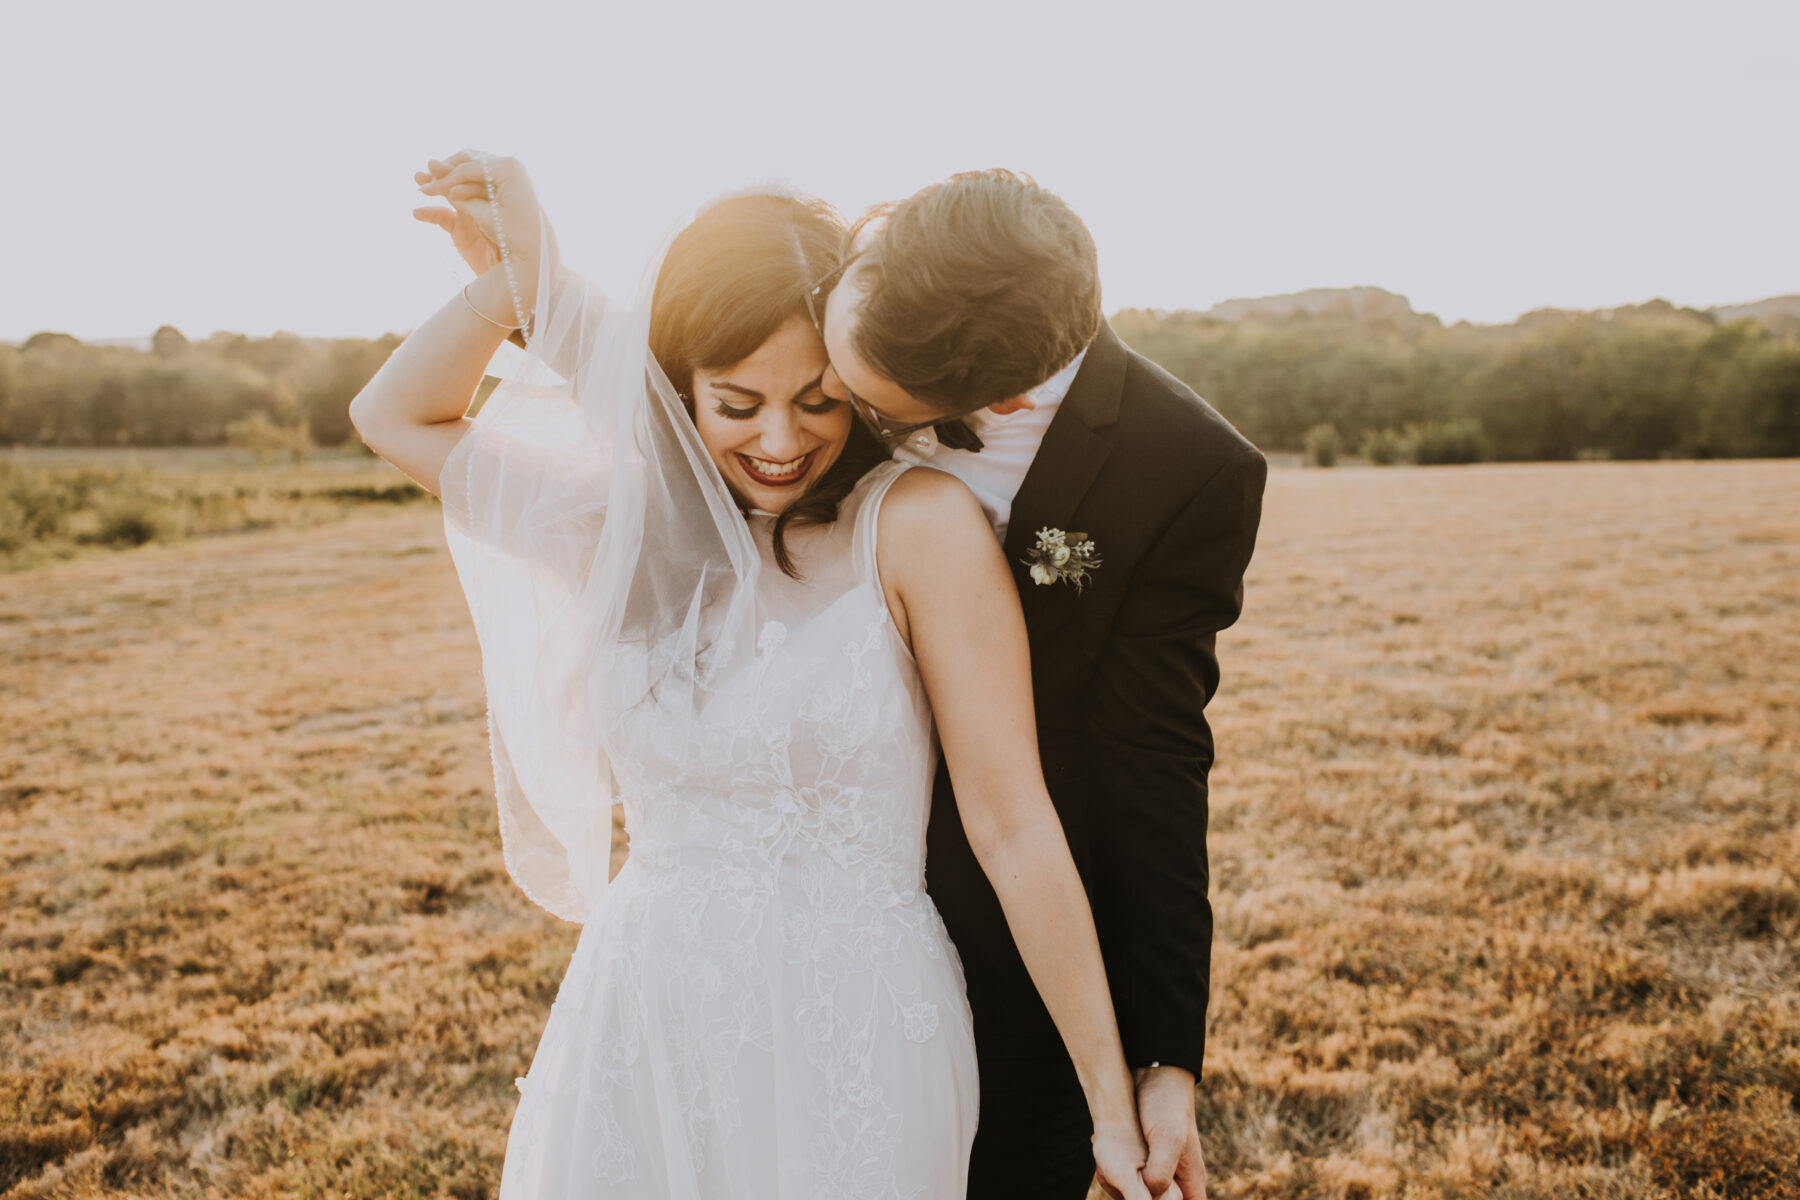 Sunset wedding photo: Nashville Wedding with Beautiful Views by Teale Photography featured on Nashville Bride Guide